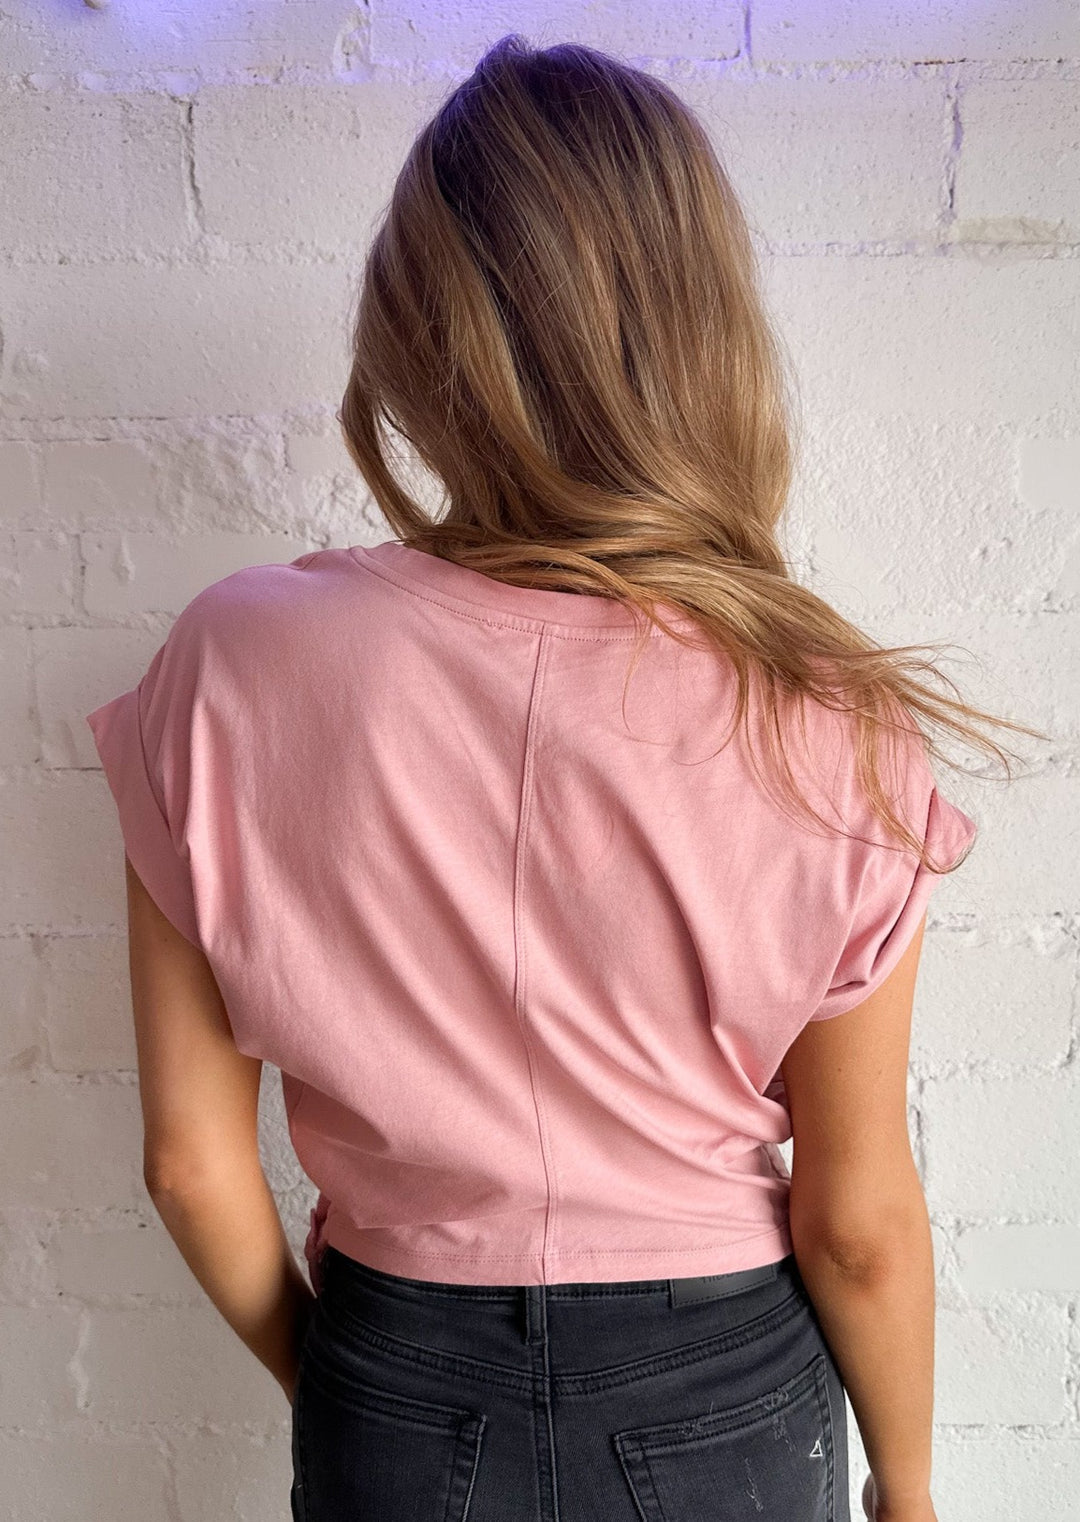 Cotton Candy Top, Tops, Adeline, Adeline, dallas boutique, dallas texas, texas boutique, women's boutique dallas, adeline boutique, dallas boutique, trendy boutique, affordable boutique